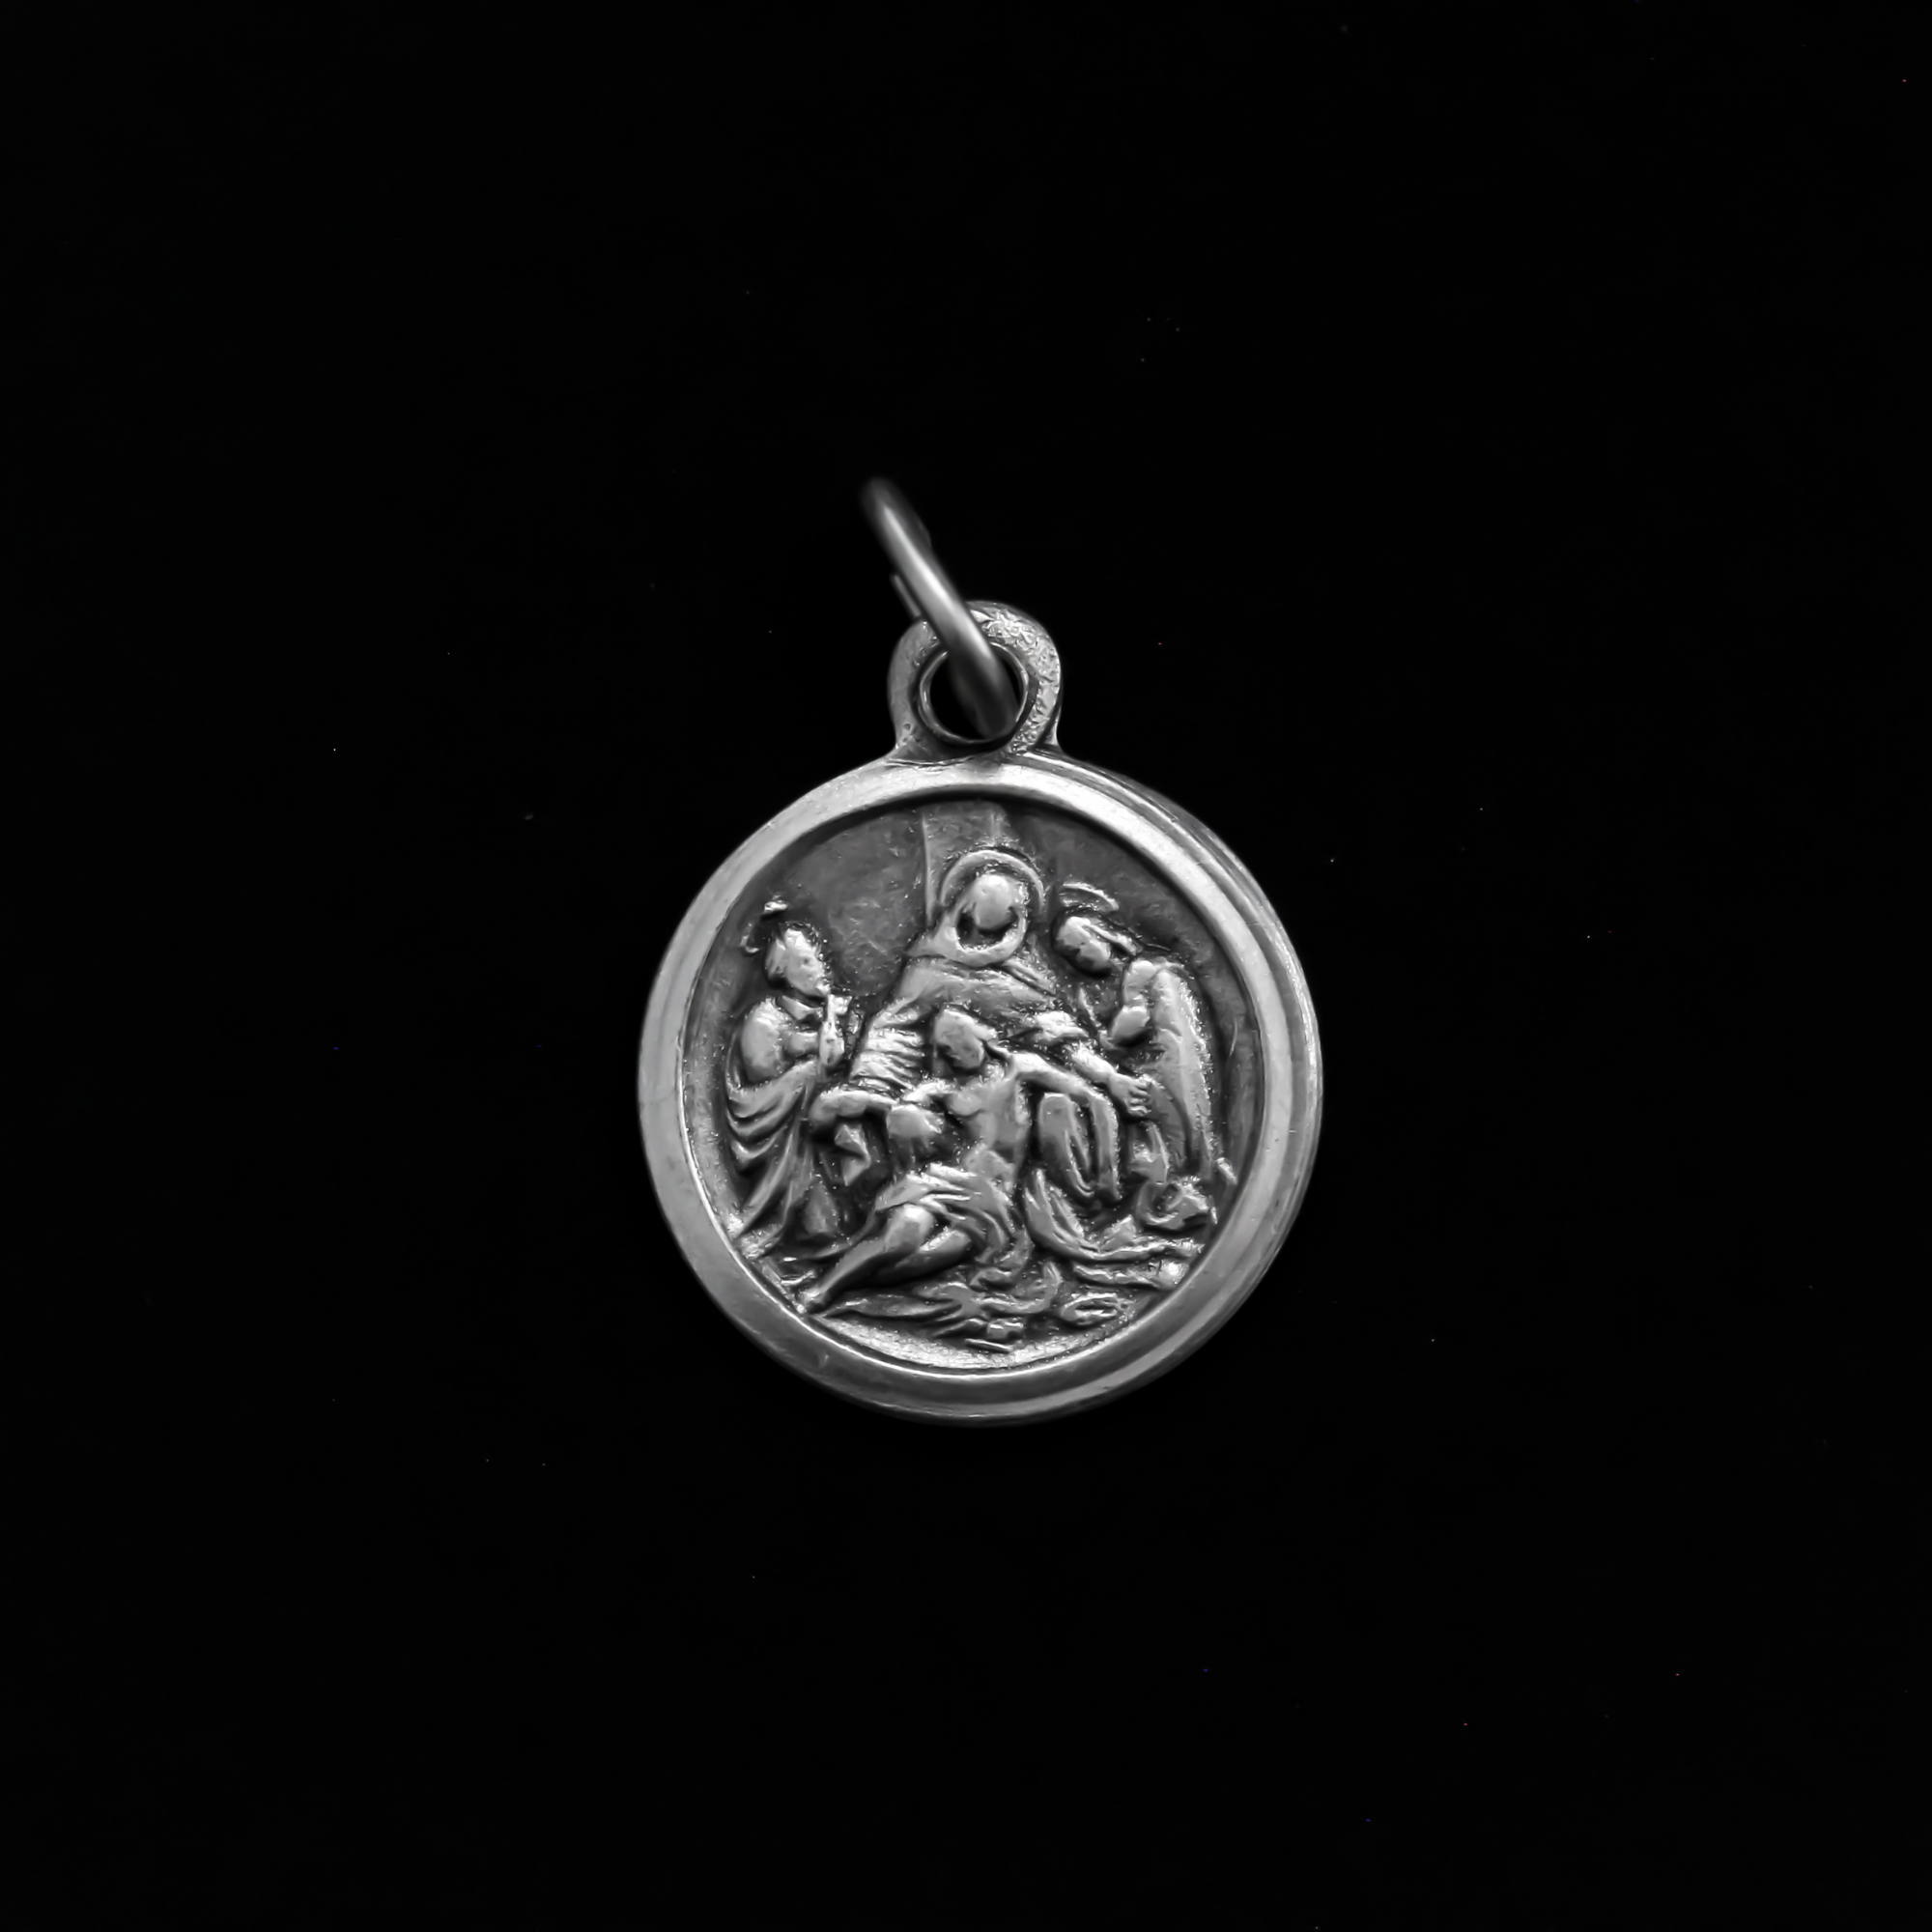 Small round Pieta medal that depicts the thirteen station of the Via Dolorosa when Jesus is taken down from the Cross and given to his Mother